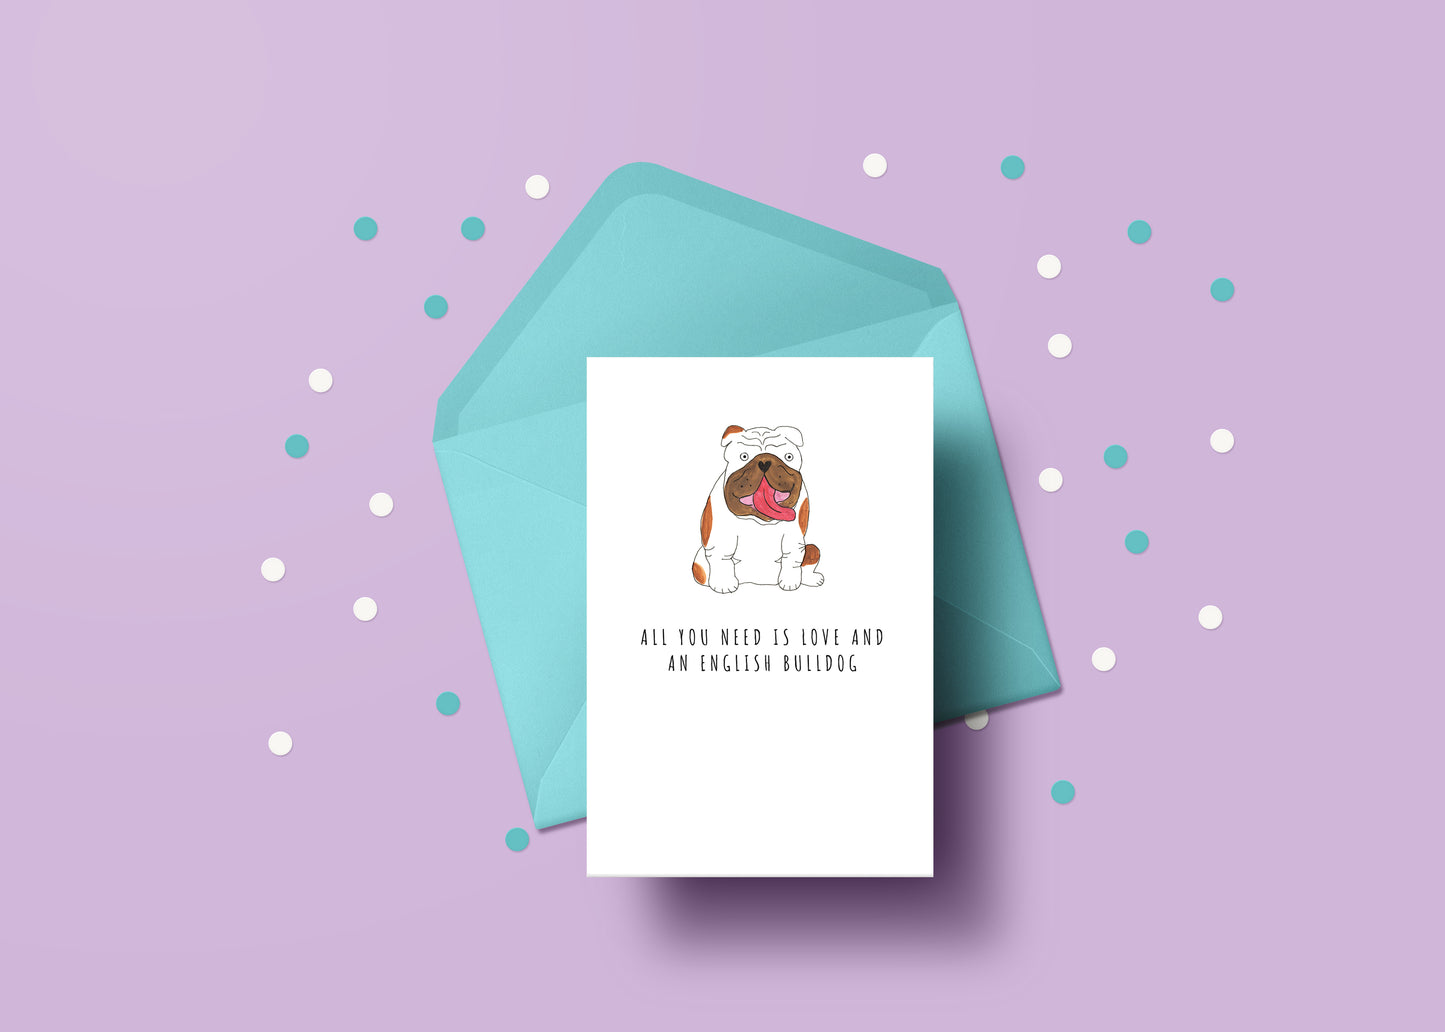 All you need is love and a English Bulldog card